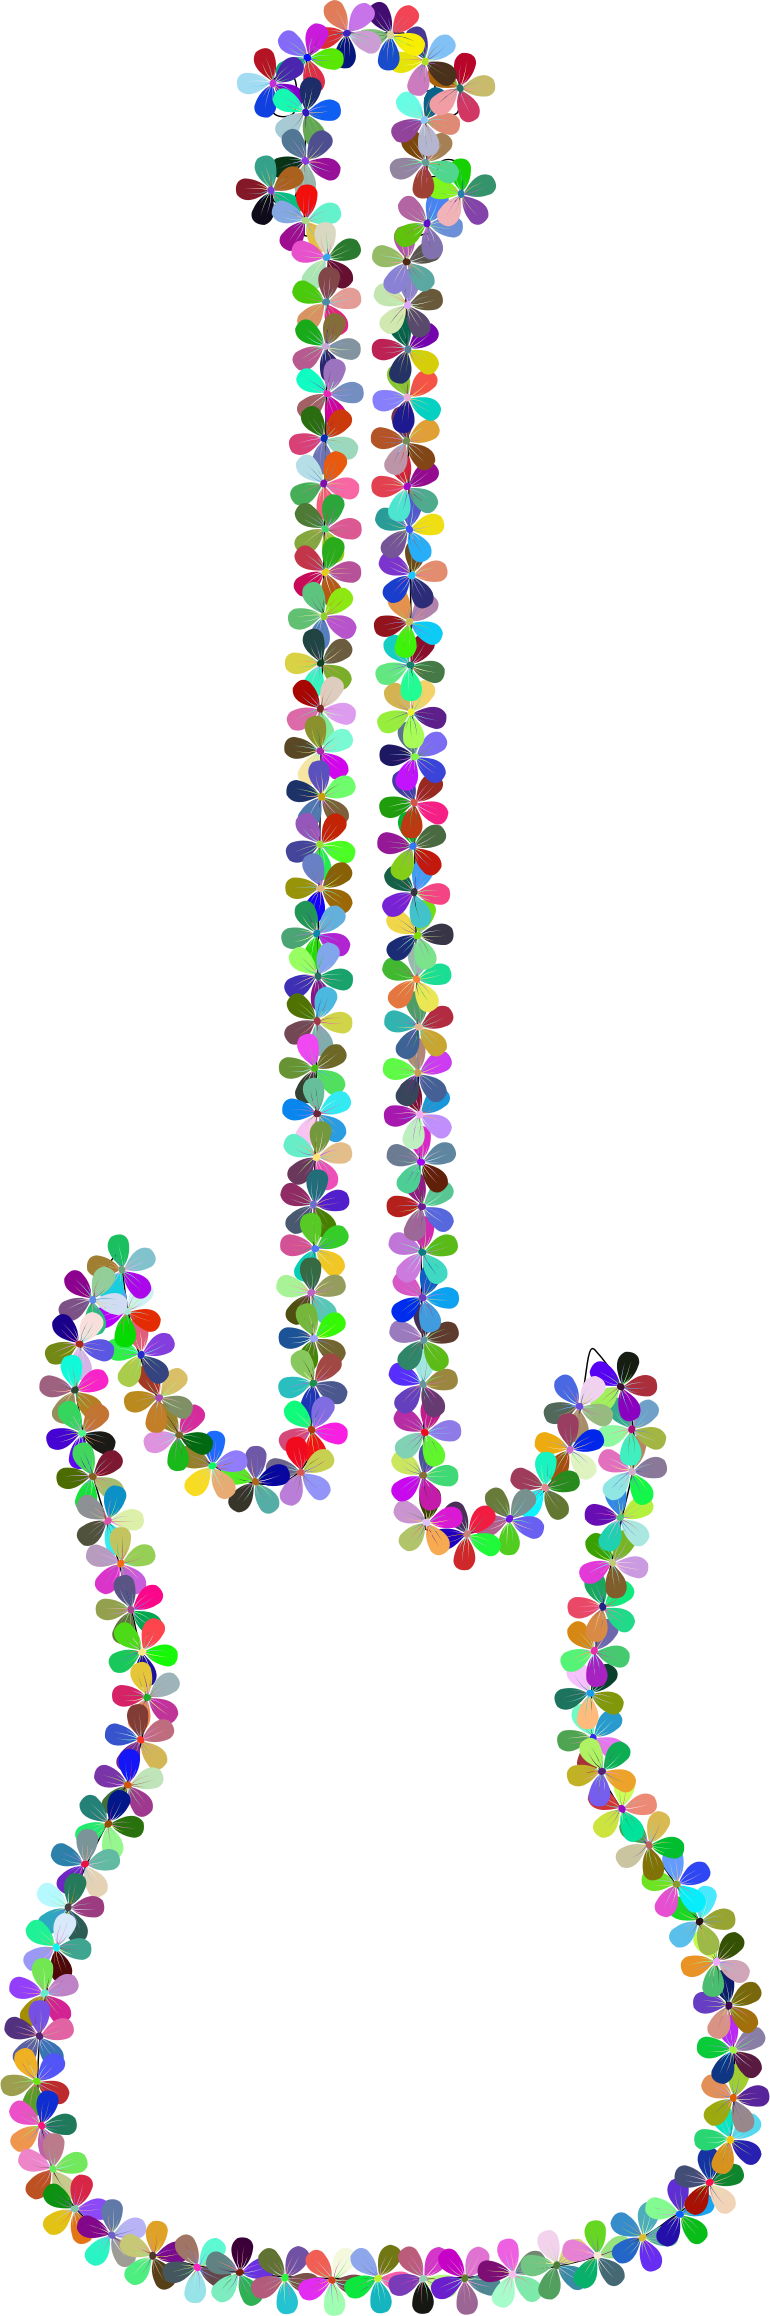 This Free Icons Png Design Of Prismatic Floral Guitar - This Free Icons Png Design Of Prismatic Floral Guitar (770x2316)